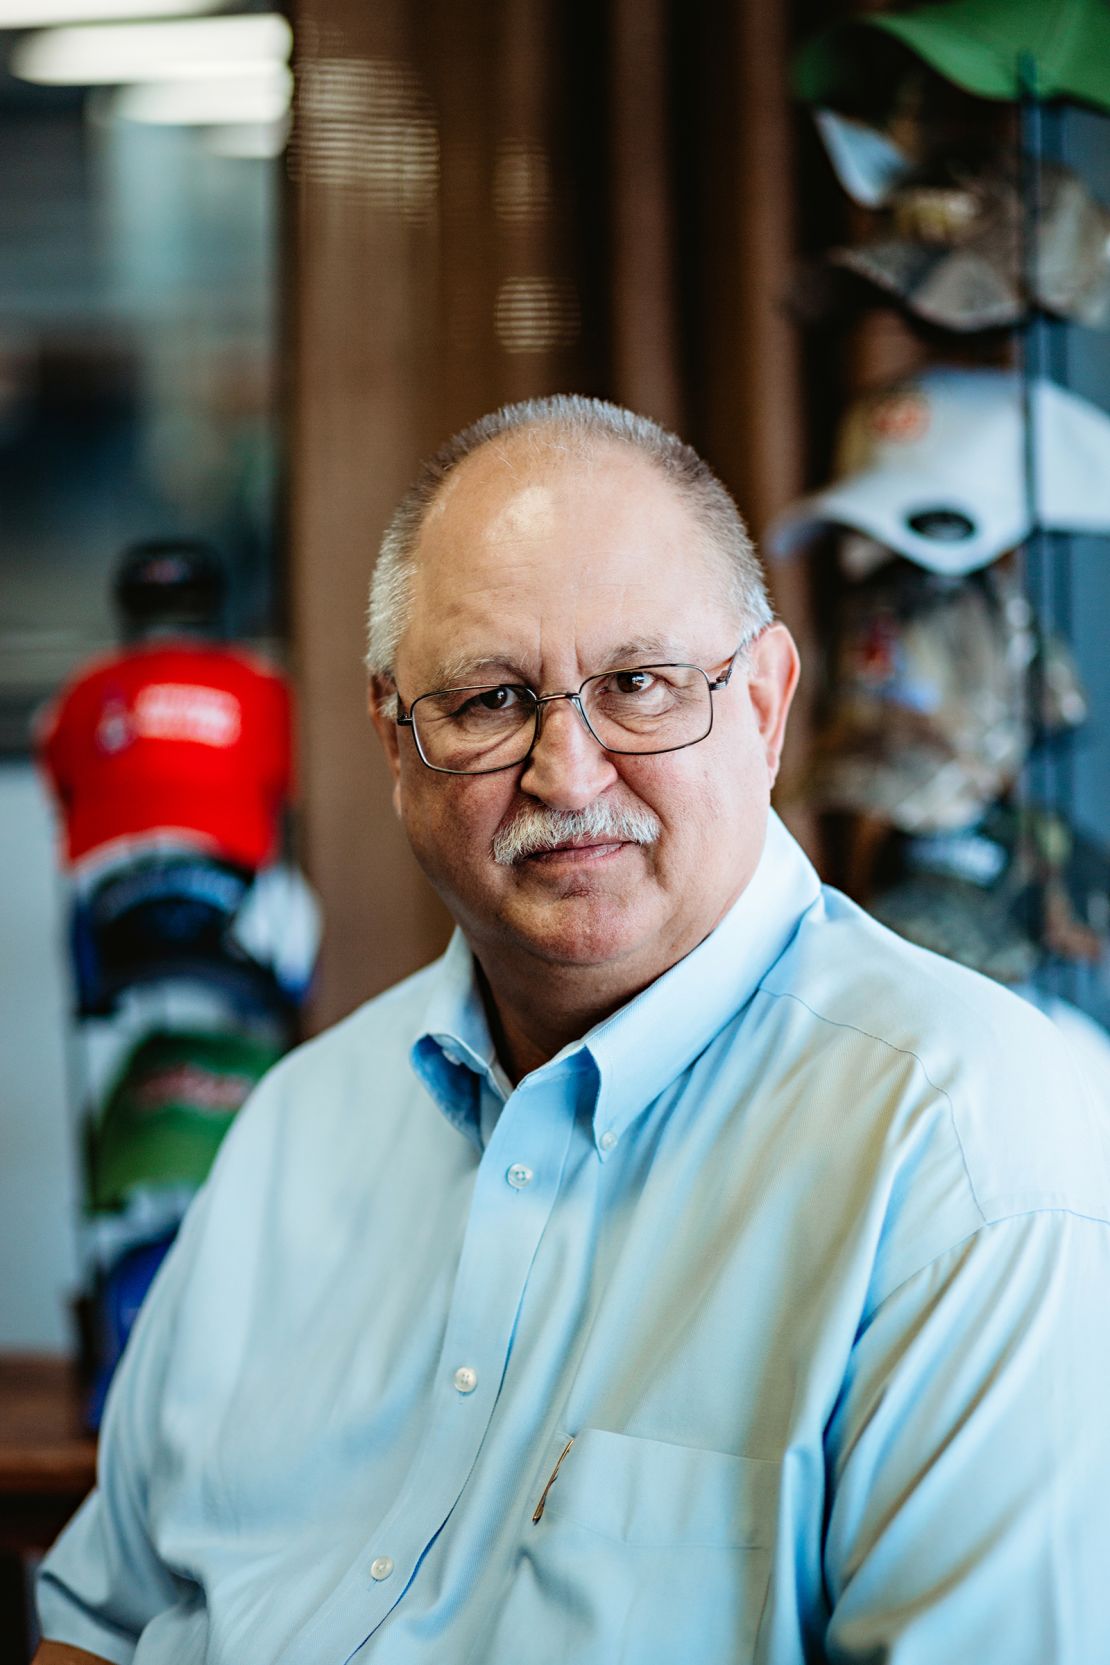 Phil Page serves as chairman of the board at Cap America, a baseball cap embroiderer based in Missouri.